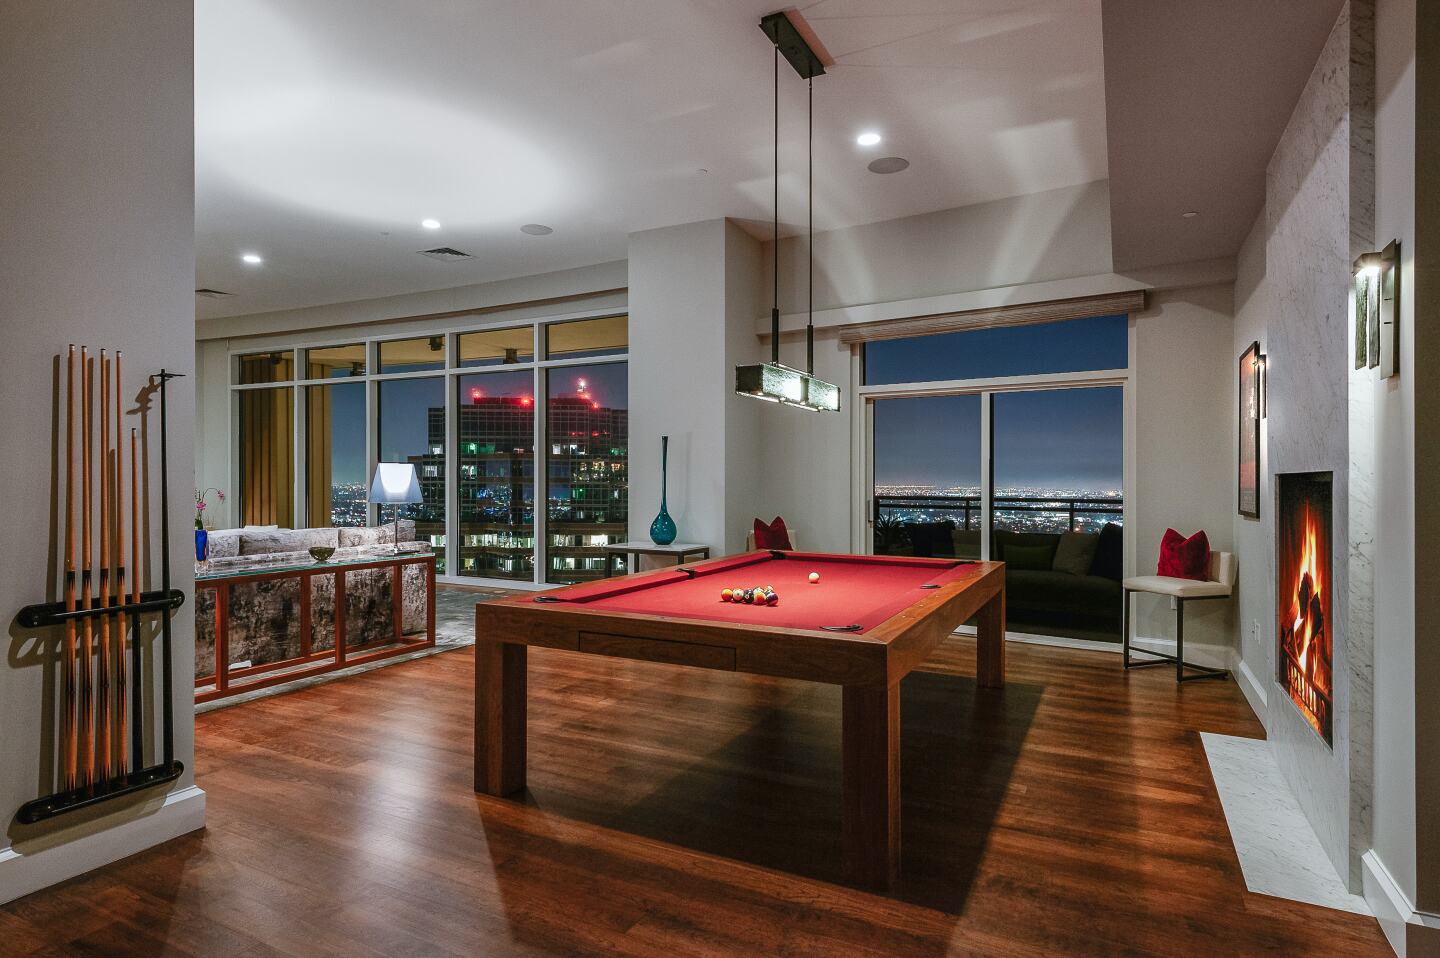 A pool table sits in an airy room with wood floors and large windows.